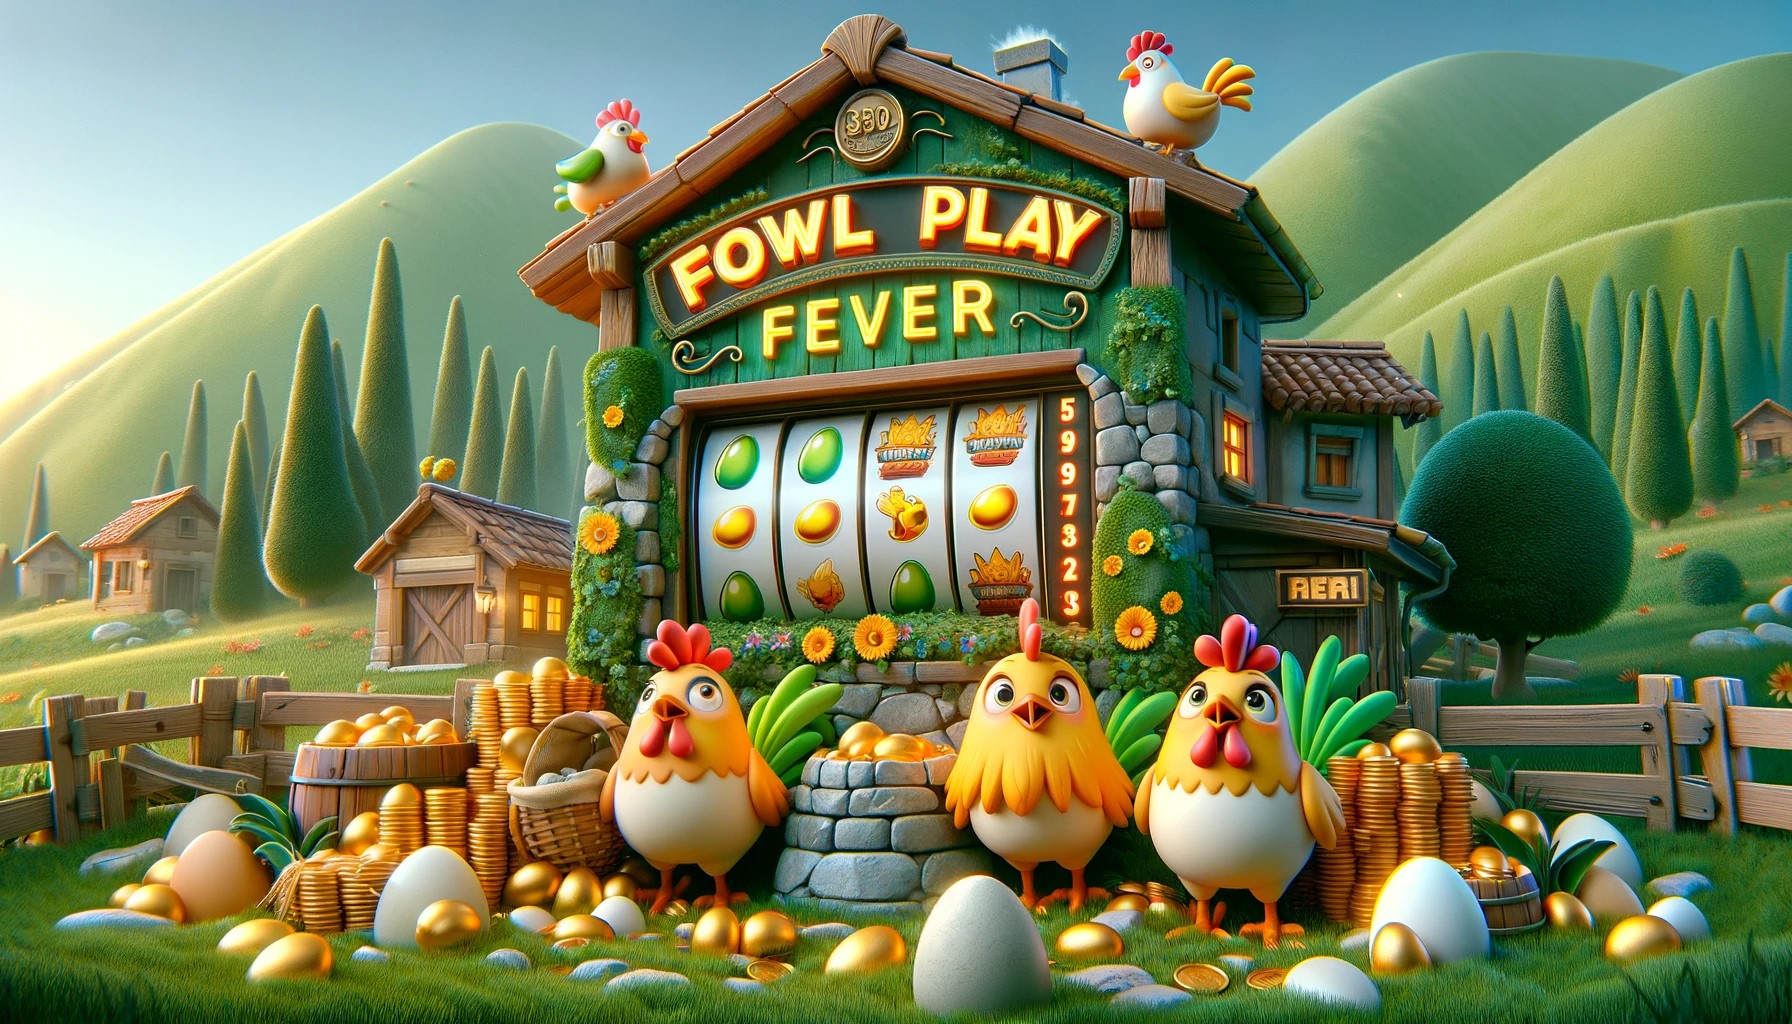 Slot Fowl Play Fever.